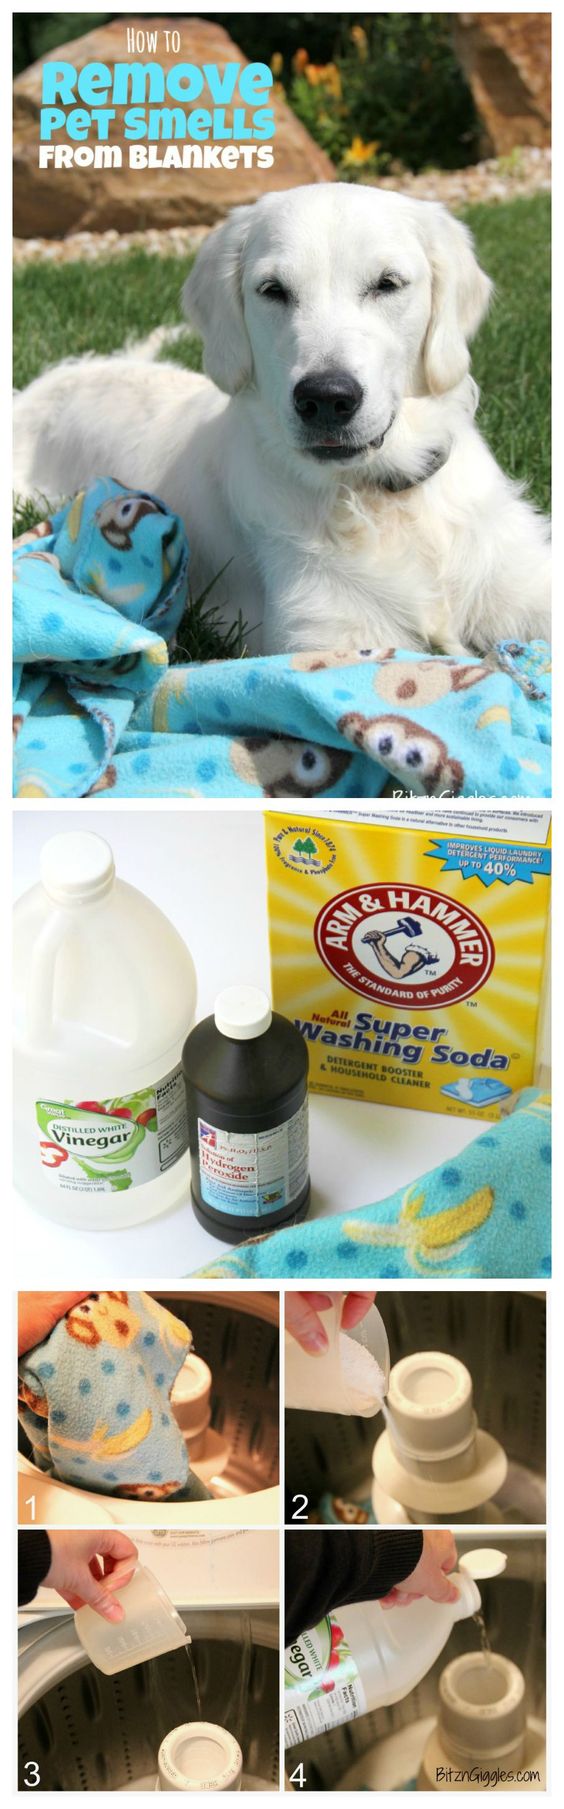 How to Remove Pet Smells From Blankets! If you have a pet, you know exactly what I'm talking about!! This solution will take smells out that regular laundry detergent will not!